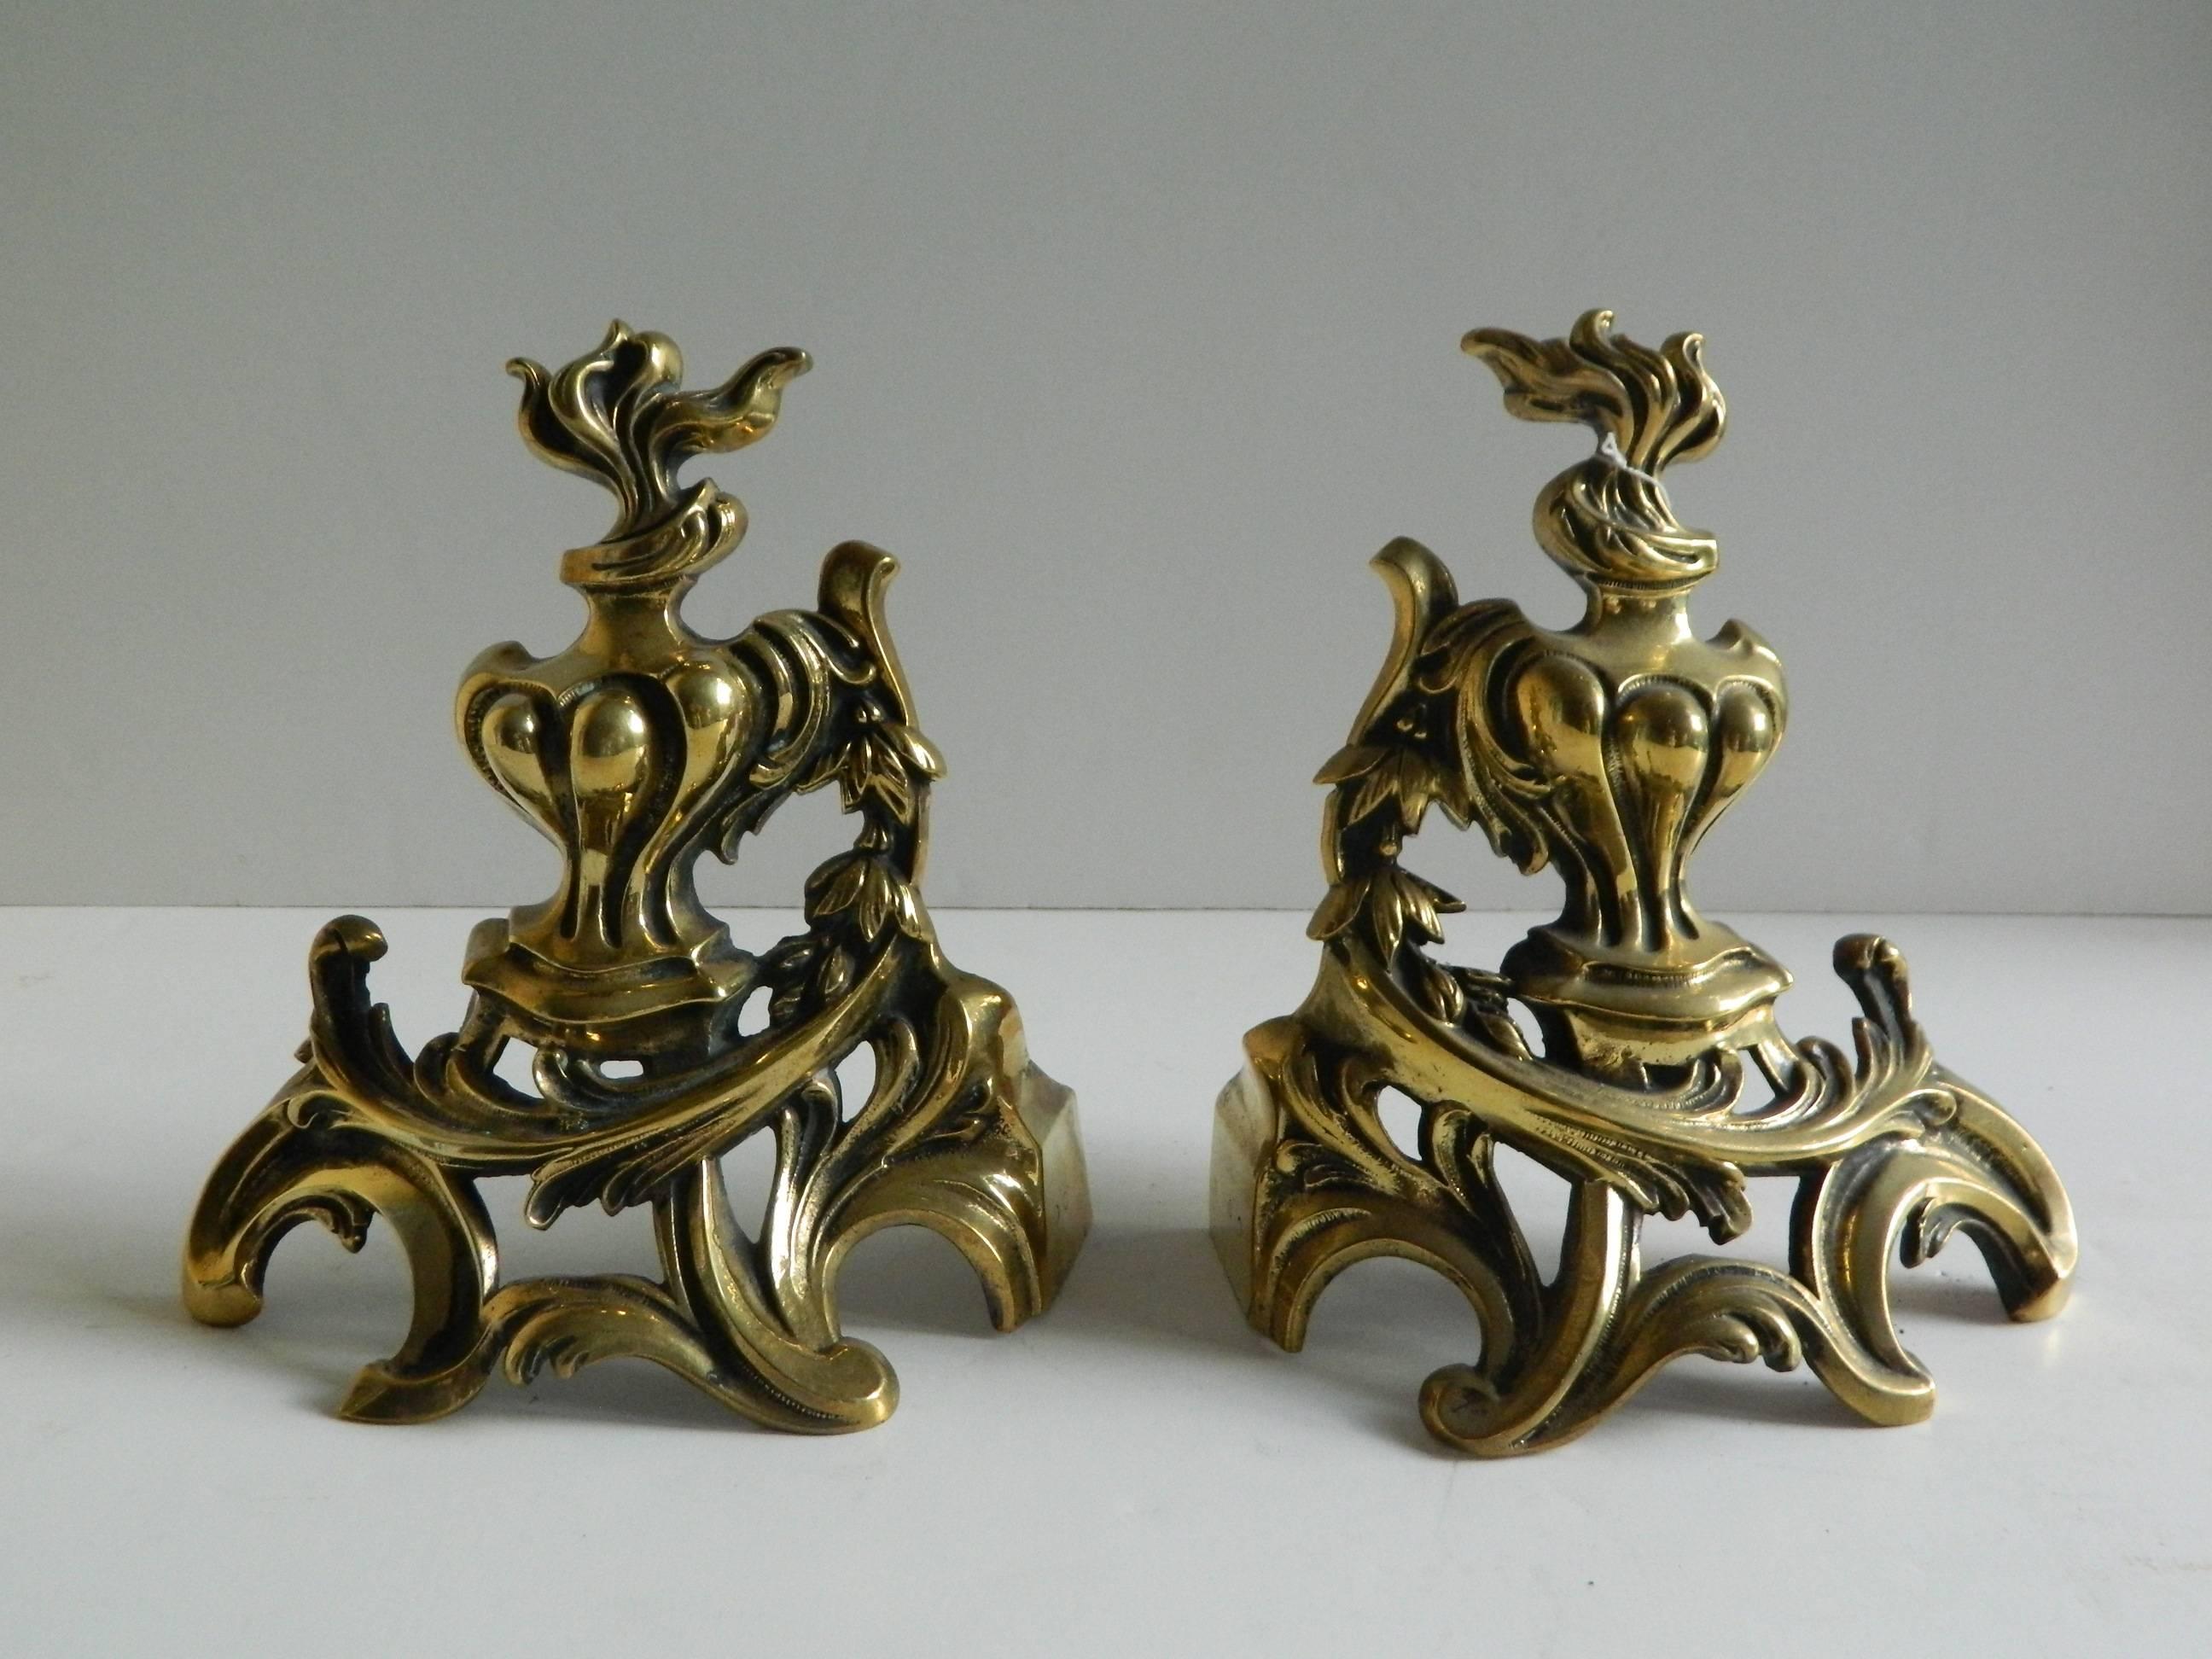 Pair of brass small chenets or andirons with flame finials, 19th century.
 